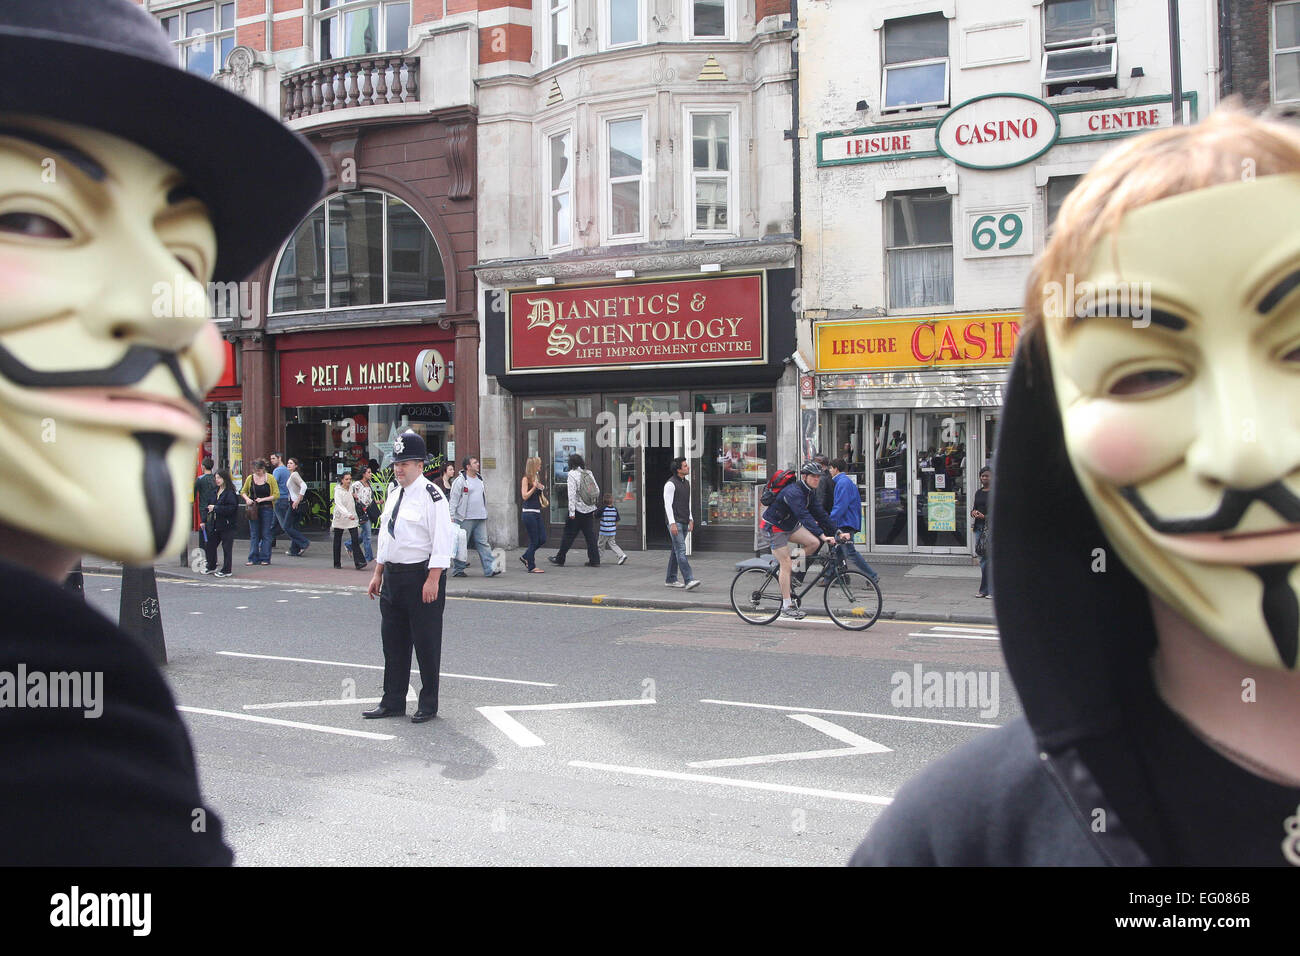 Scientology protest in Guy Fawkes masks in font of Dianetics and Scientology Life improvement center London Stock Photo